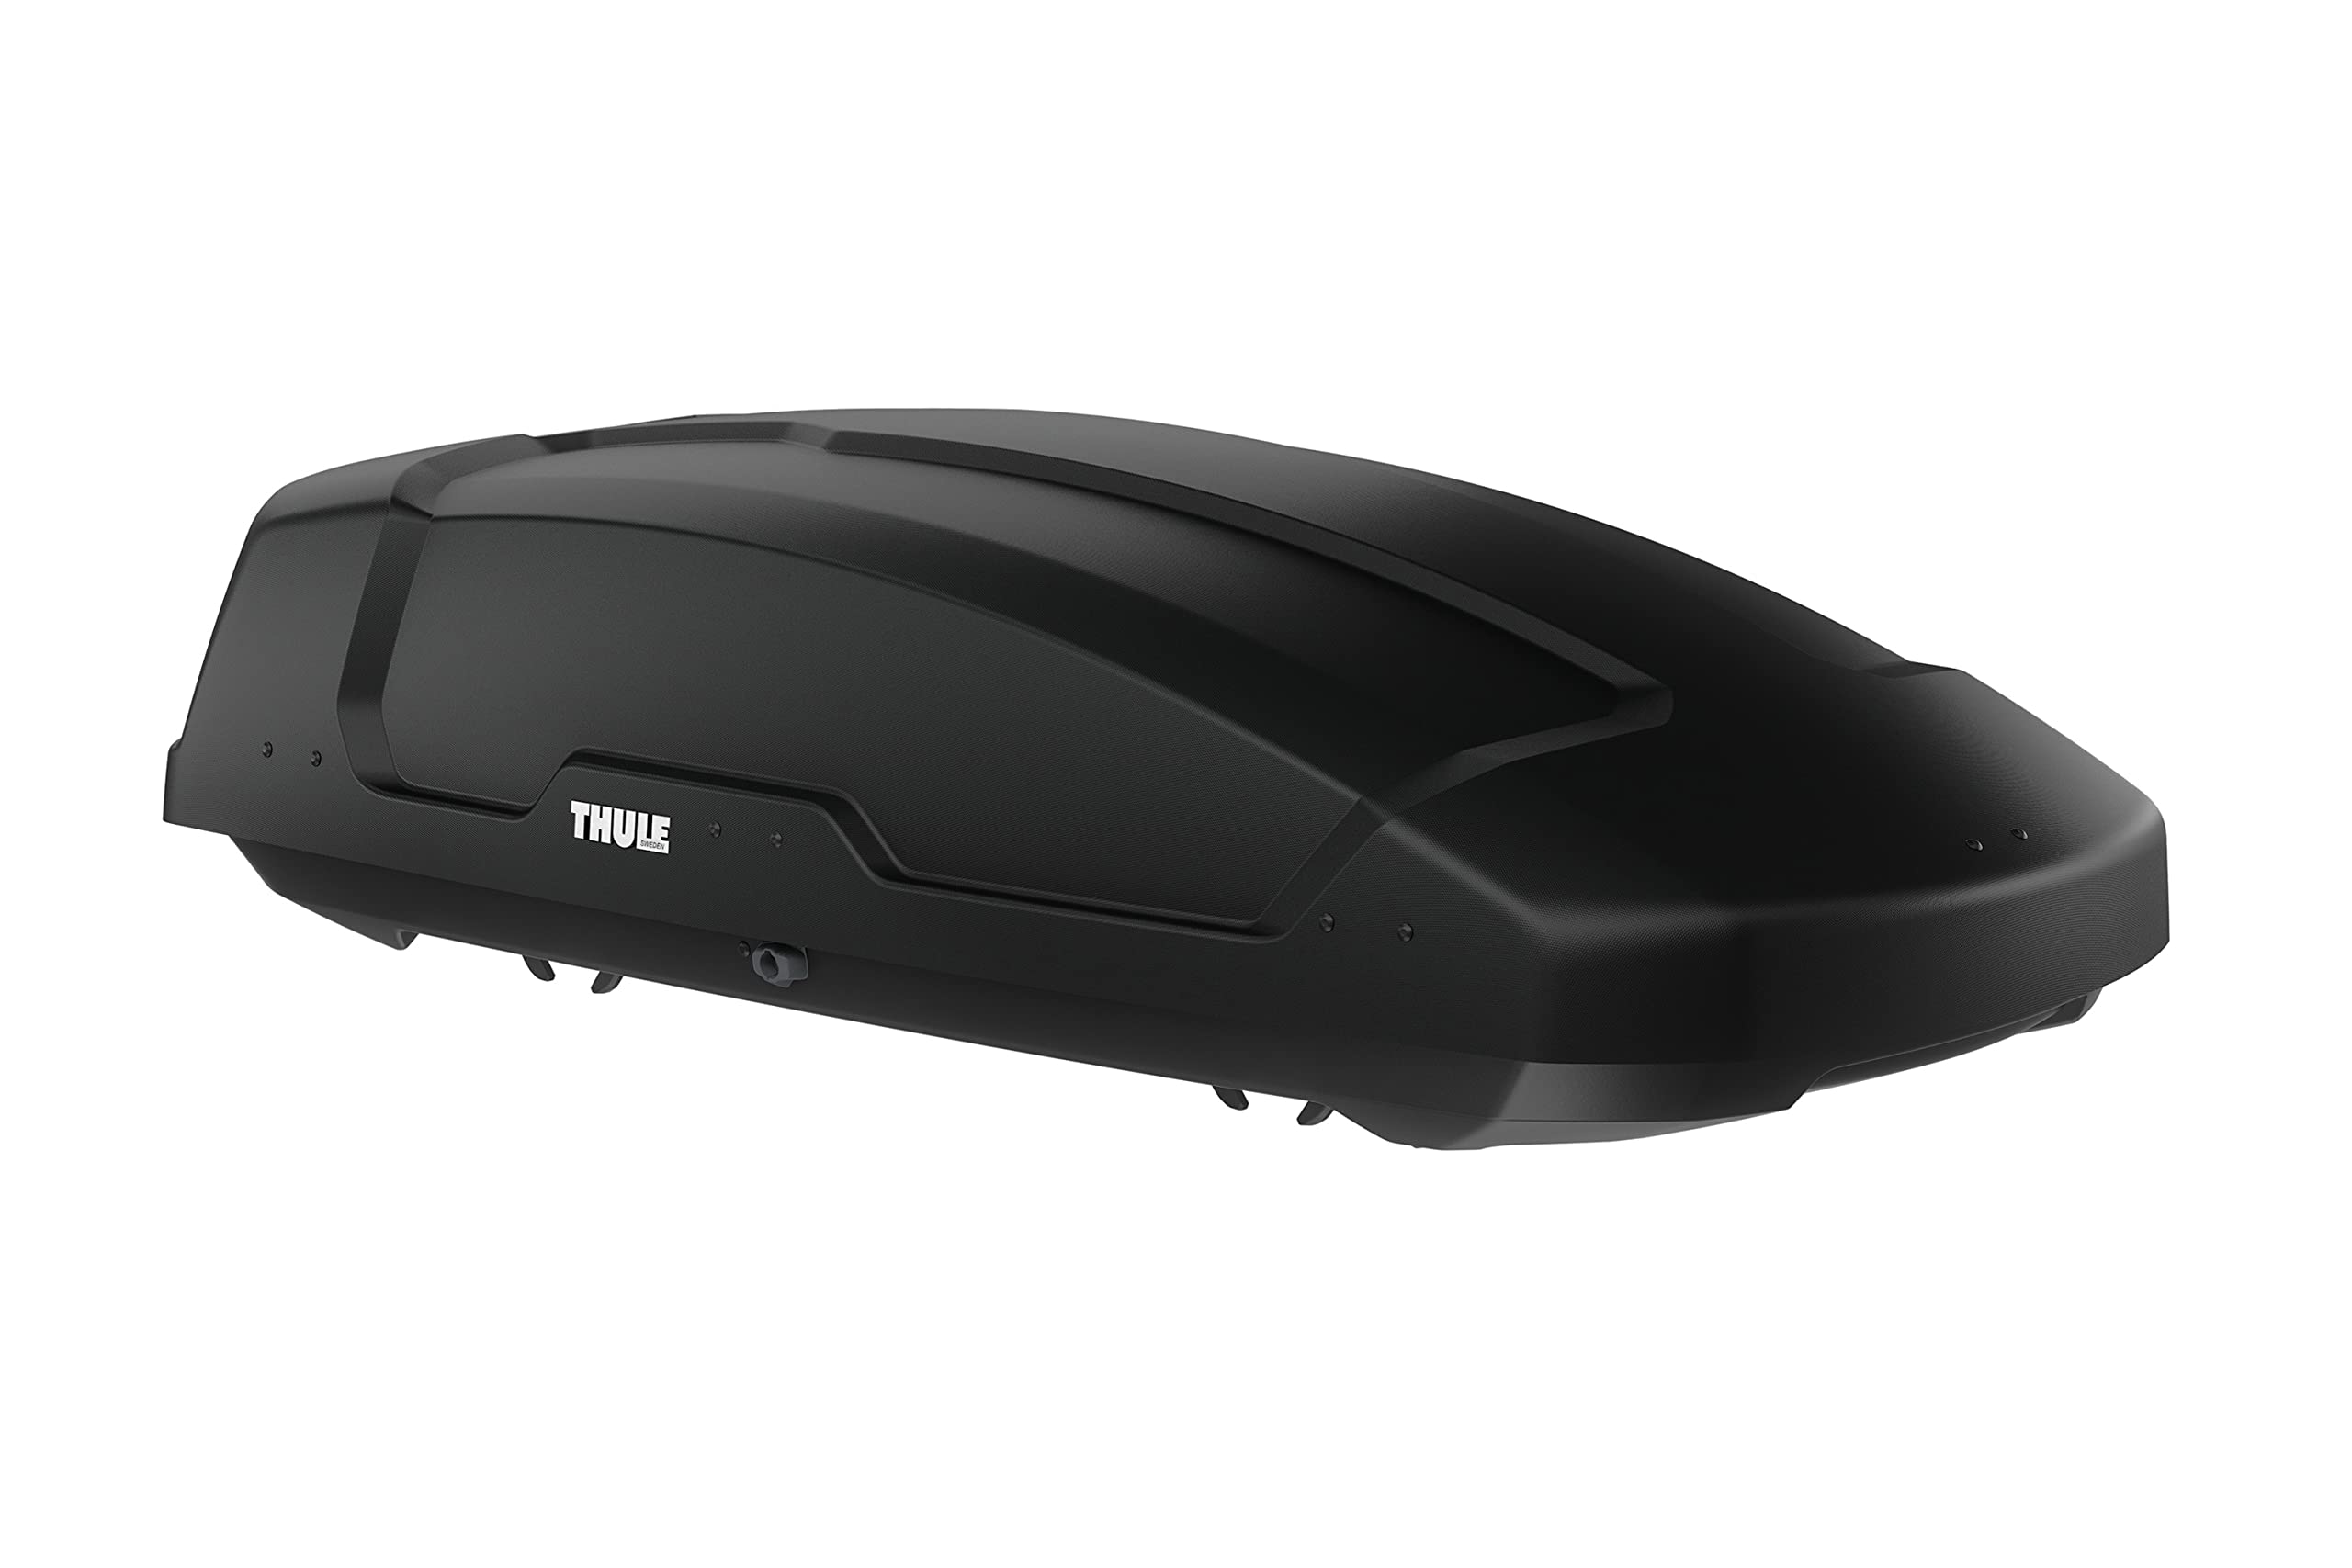 Thule Force XT Rooftop Cargo Box Sport $558.95 (various sizes)